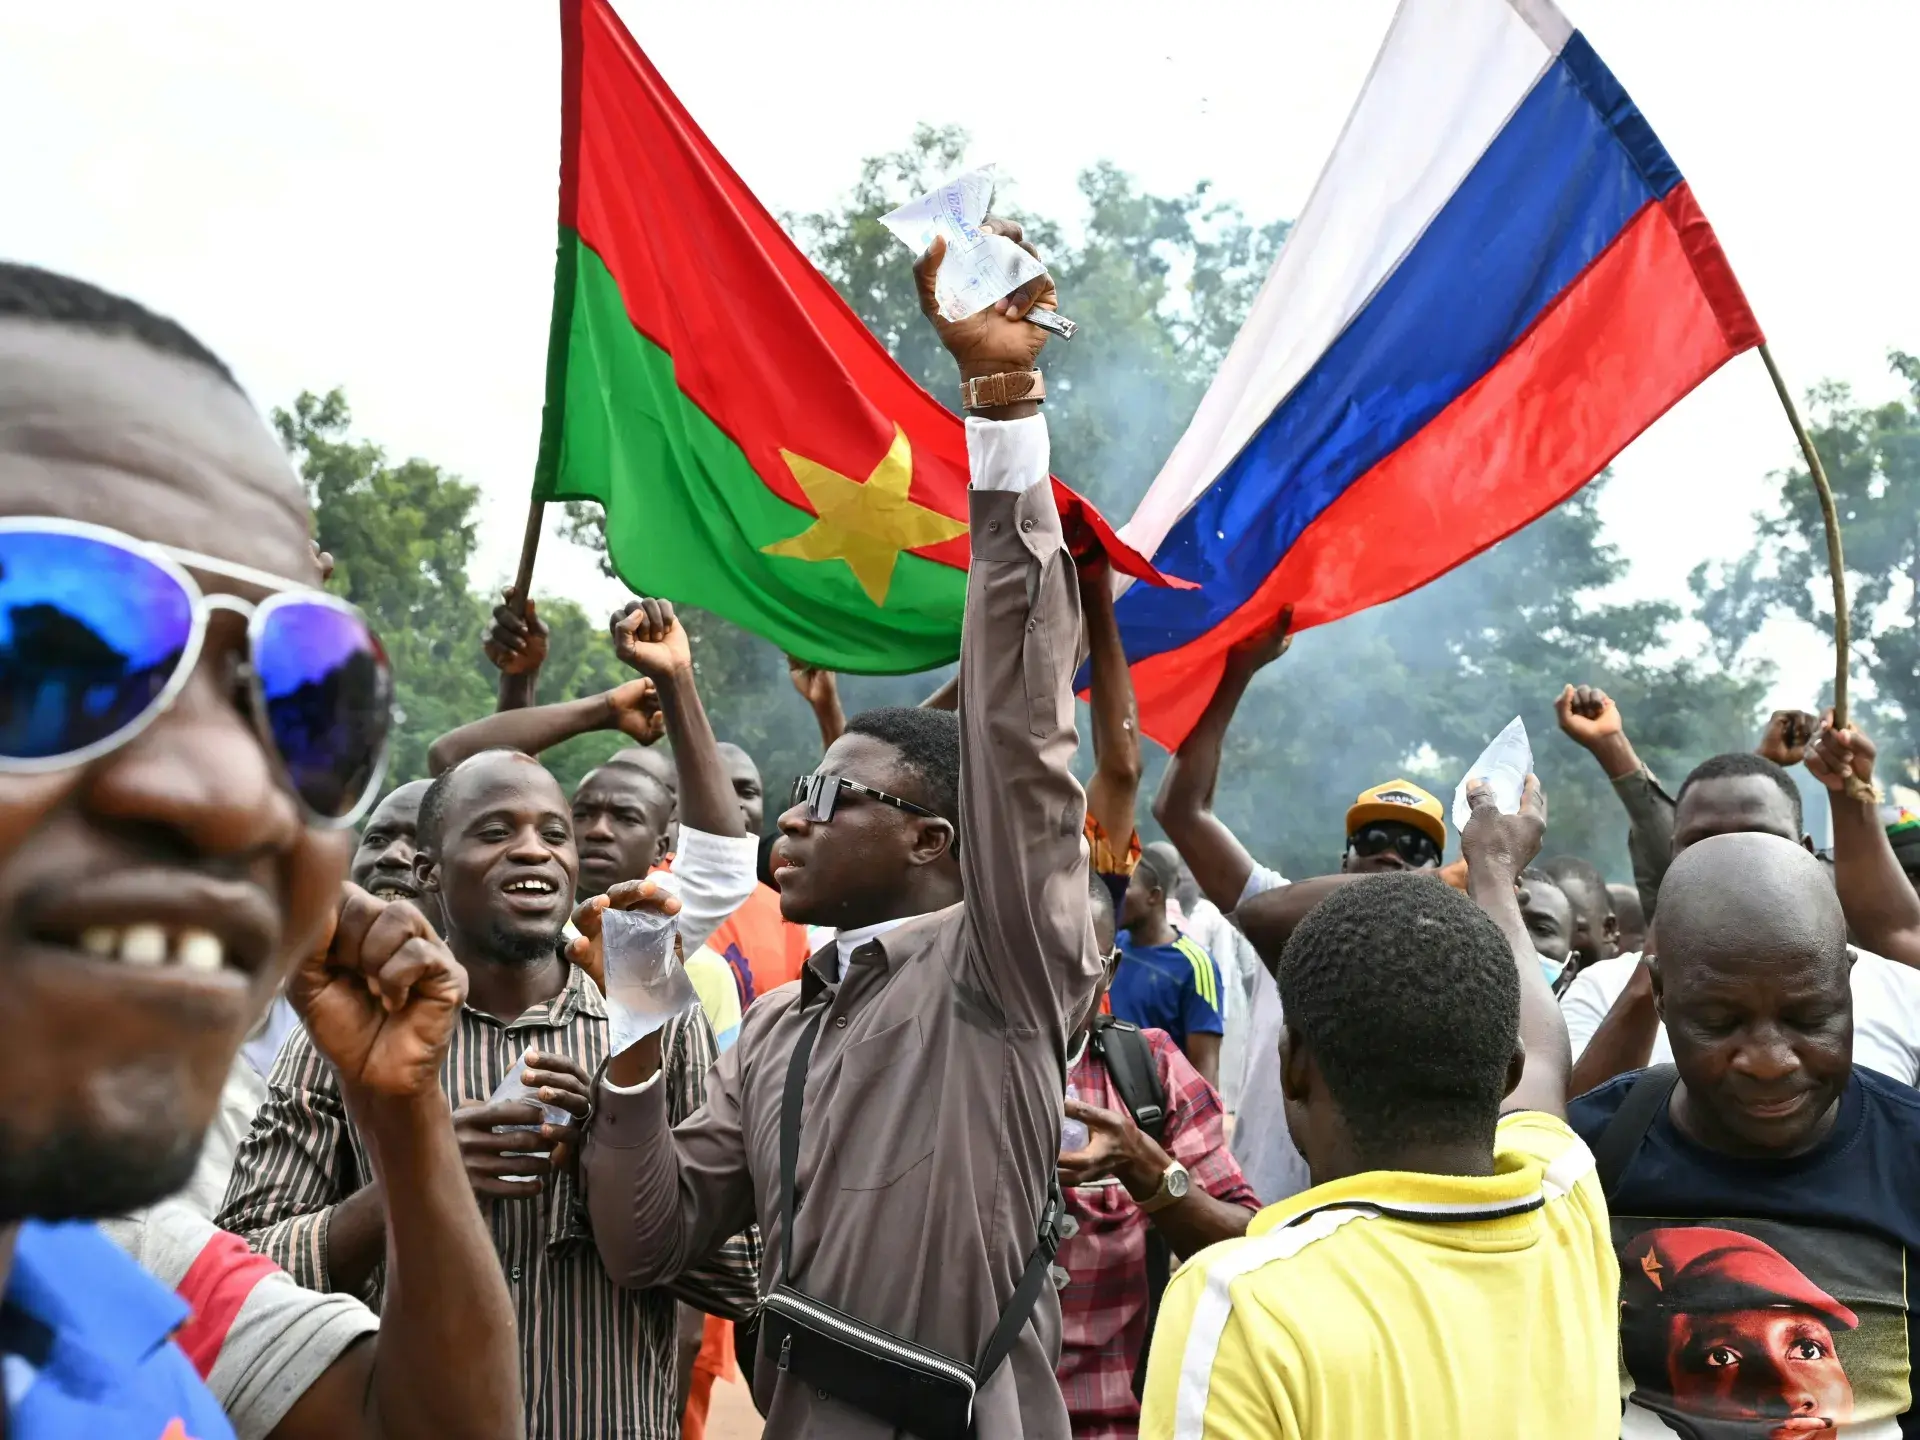 Russia to increase military instructors in West Africa's Burkina Faso